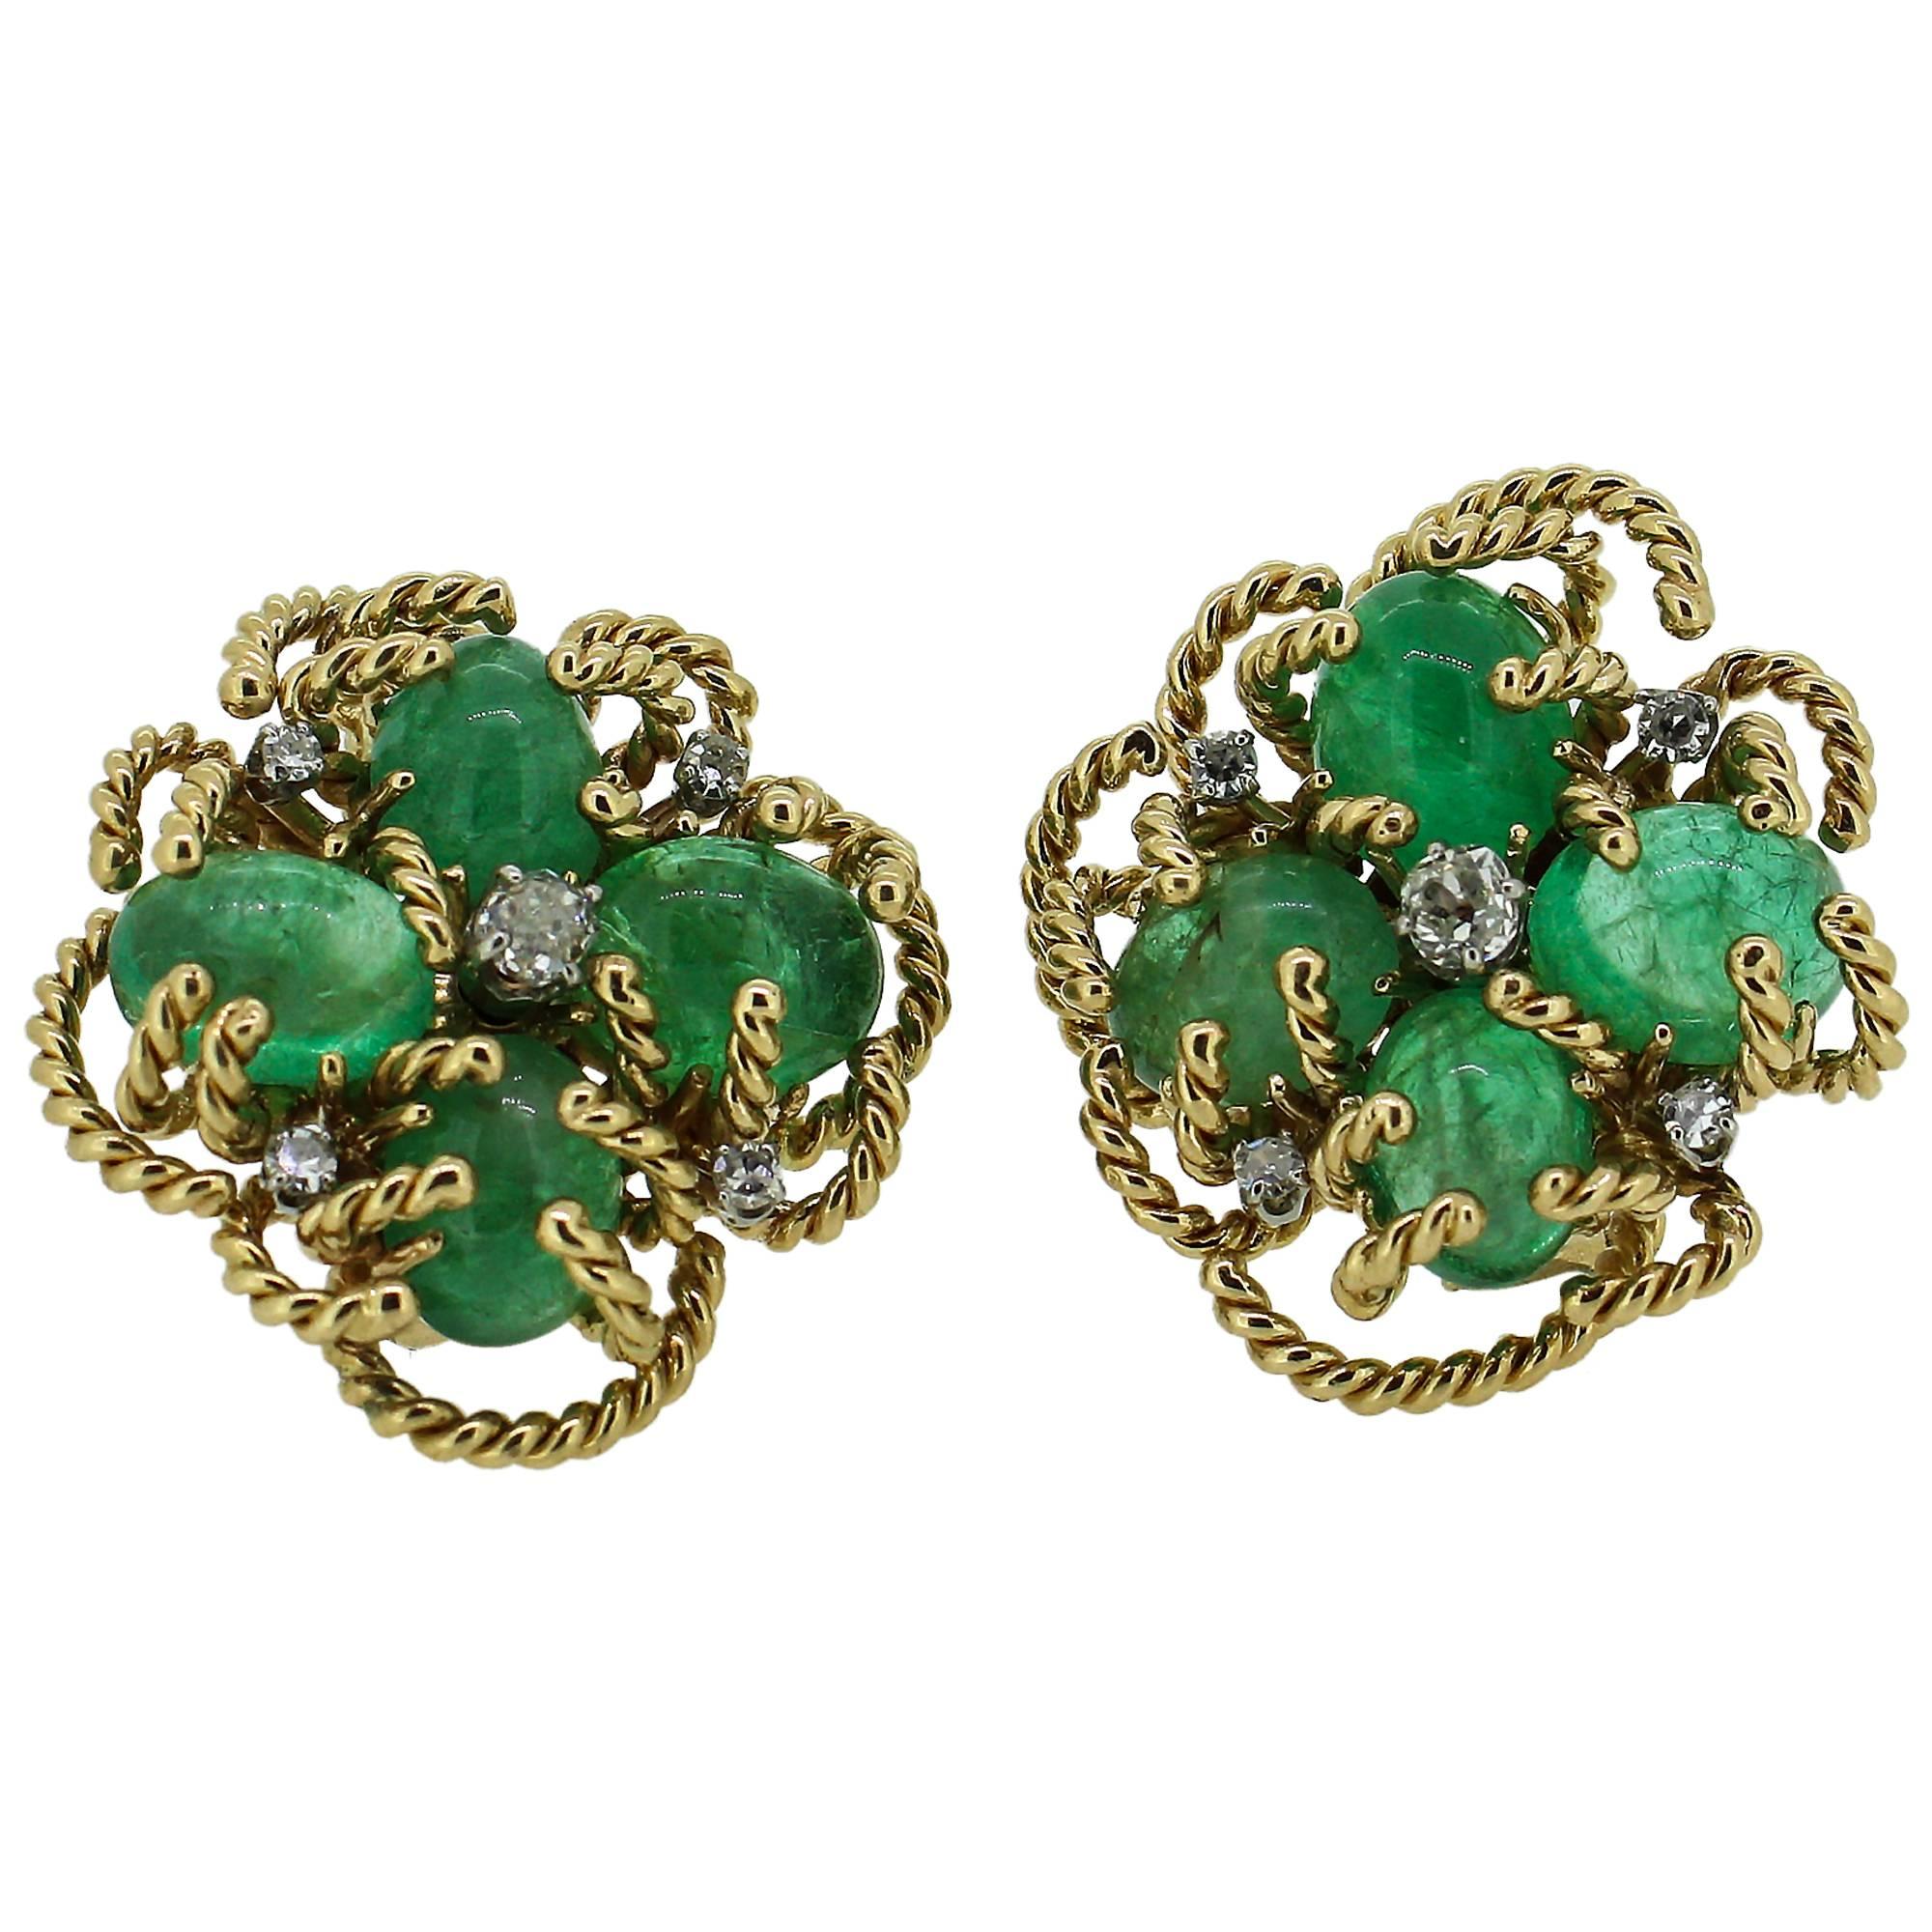 1970s Modernist Cabochon Emerald and Old Cut Diamond Clover-Motif Earrings